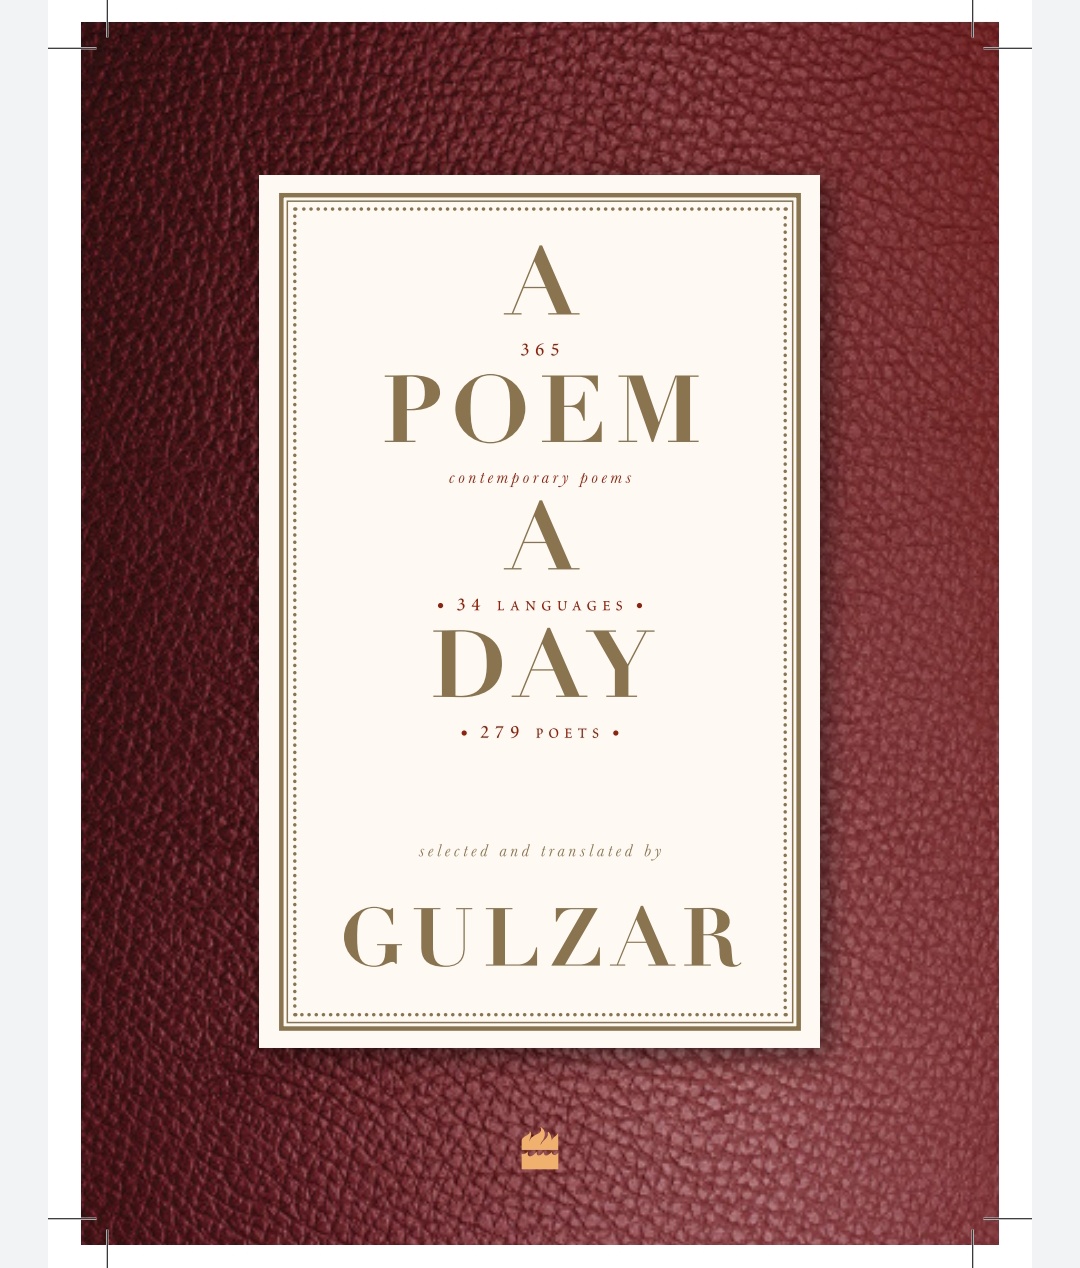 HarperCollins India presents A POEM A DAY, selected and translated by GULZAR: OUT NOW!